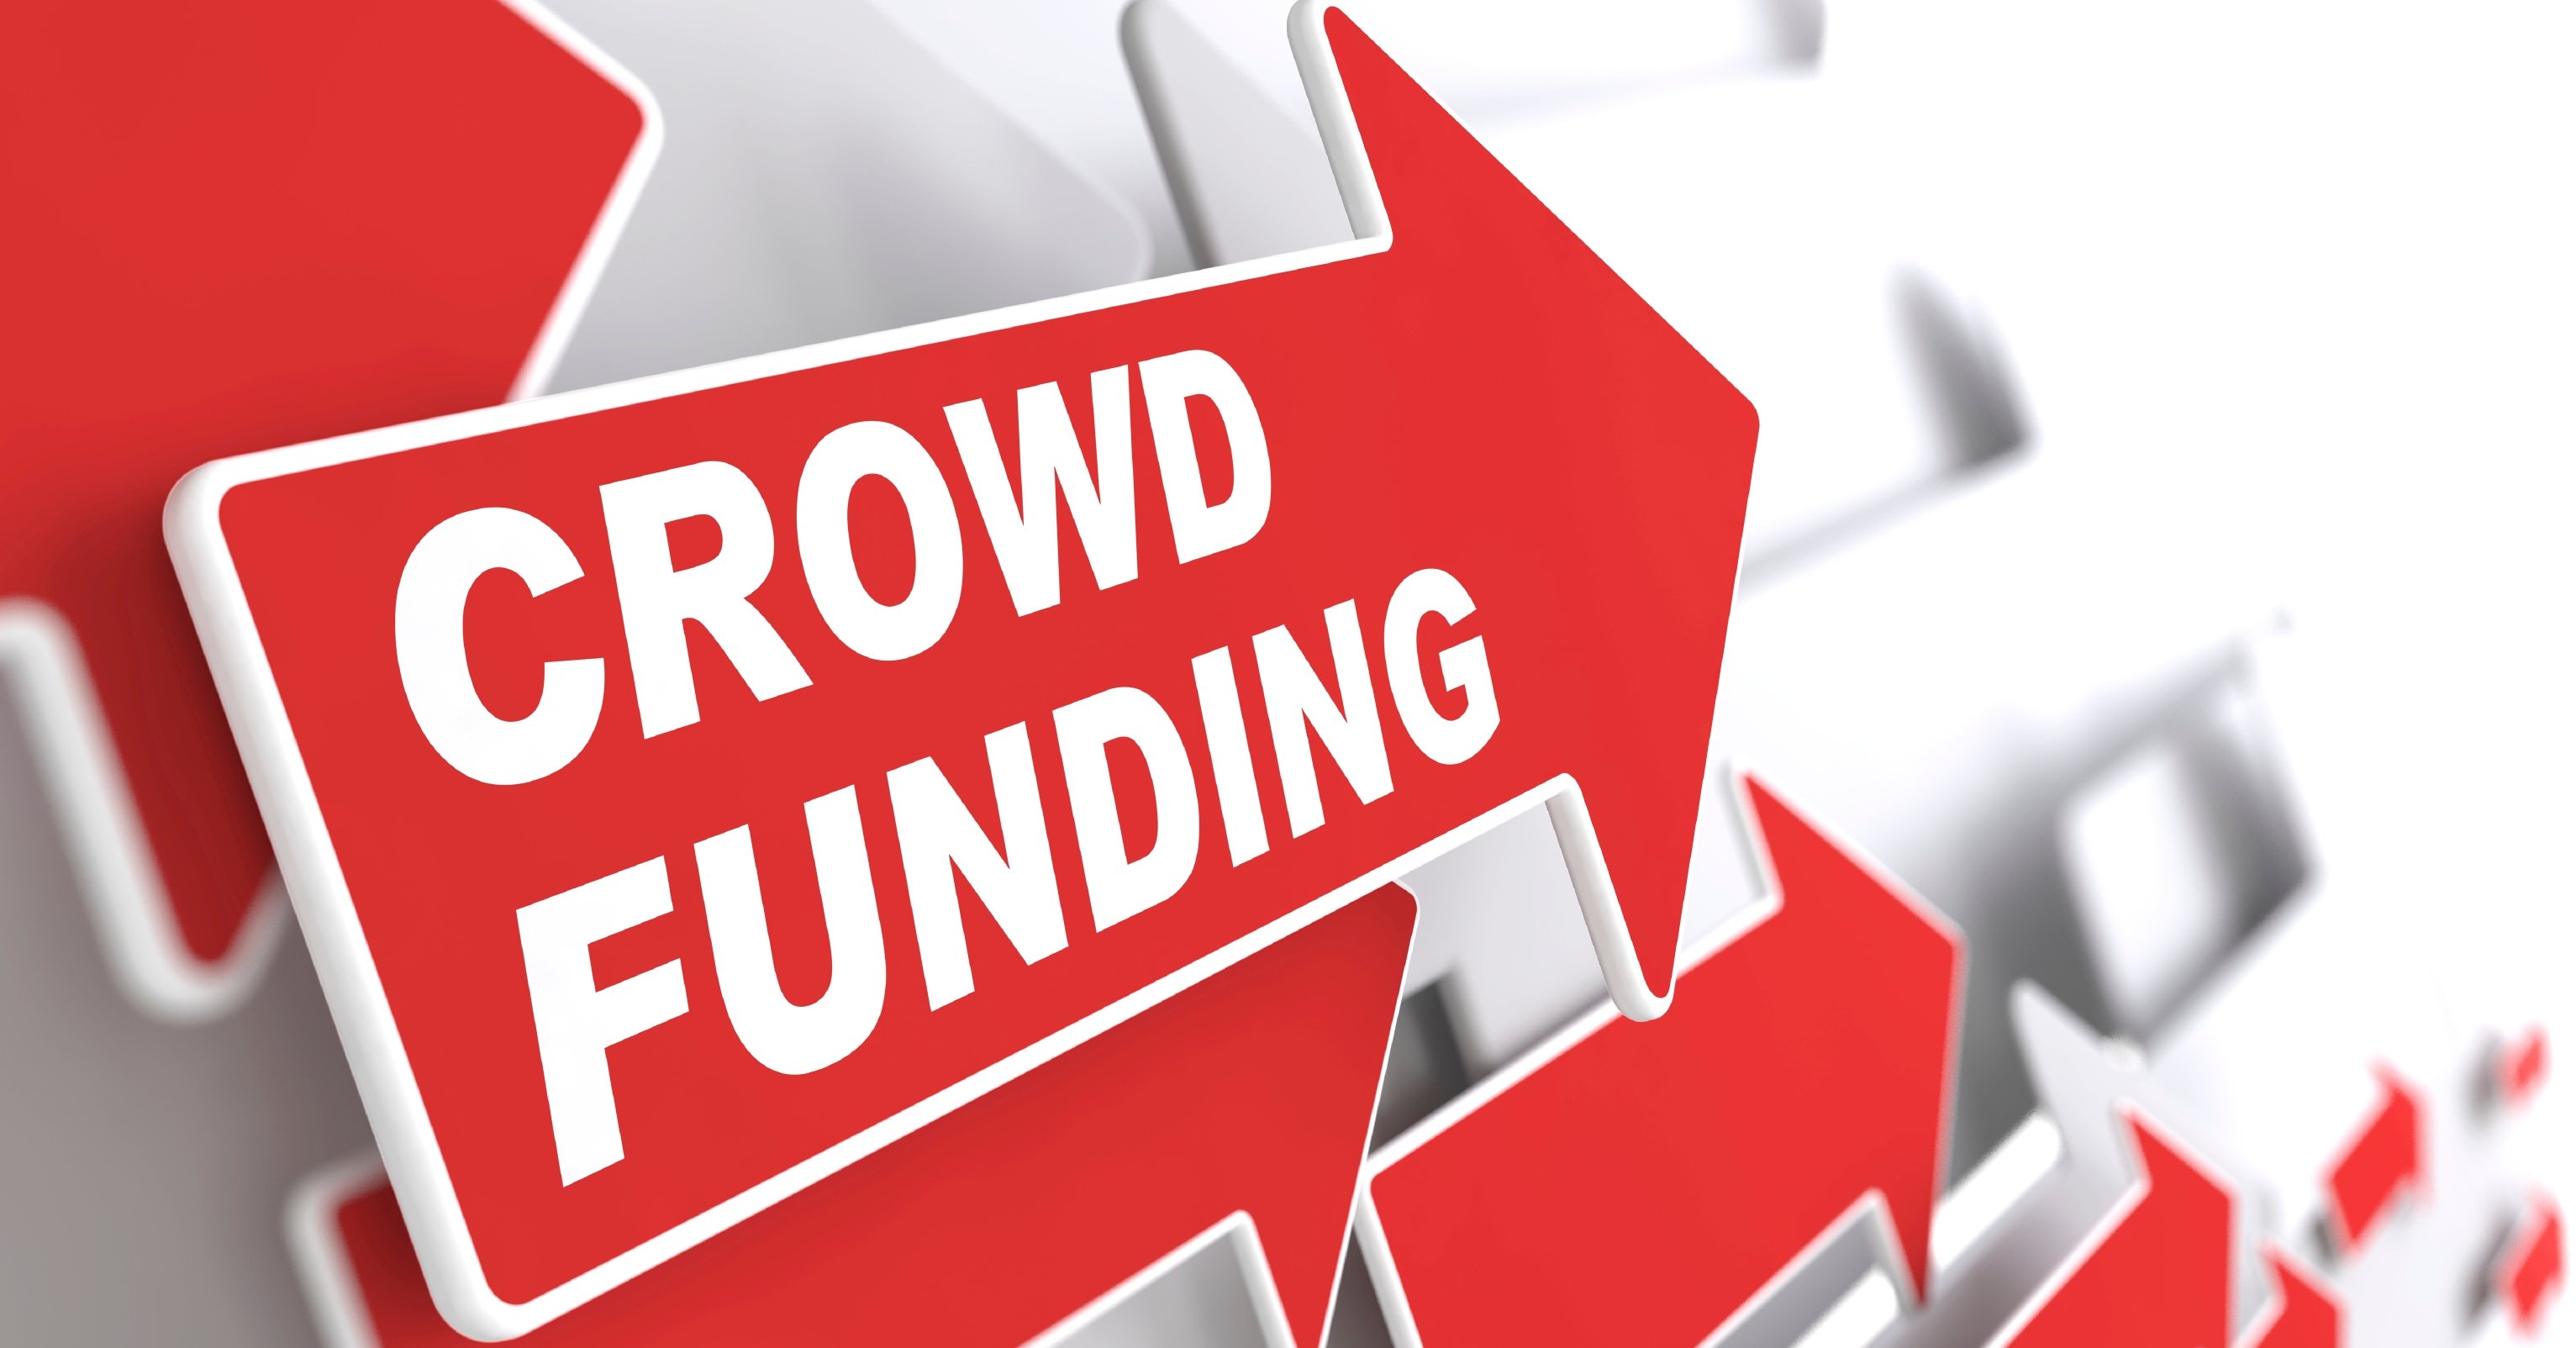 Landlords raise £30,000 via Crowdfunder in just 5 days